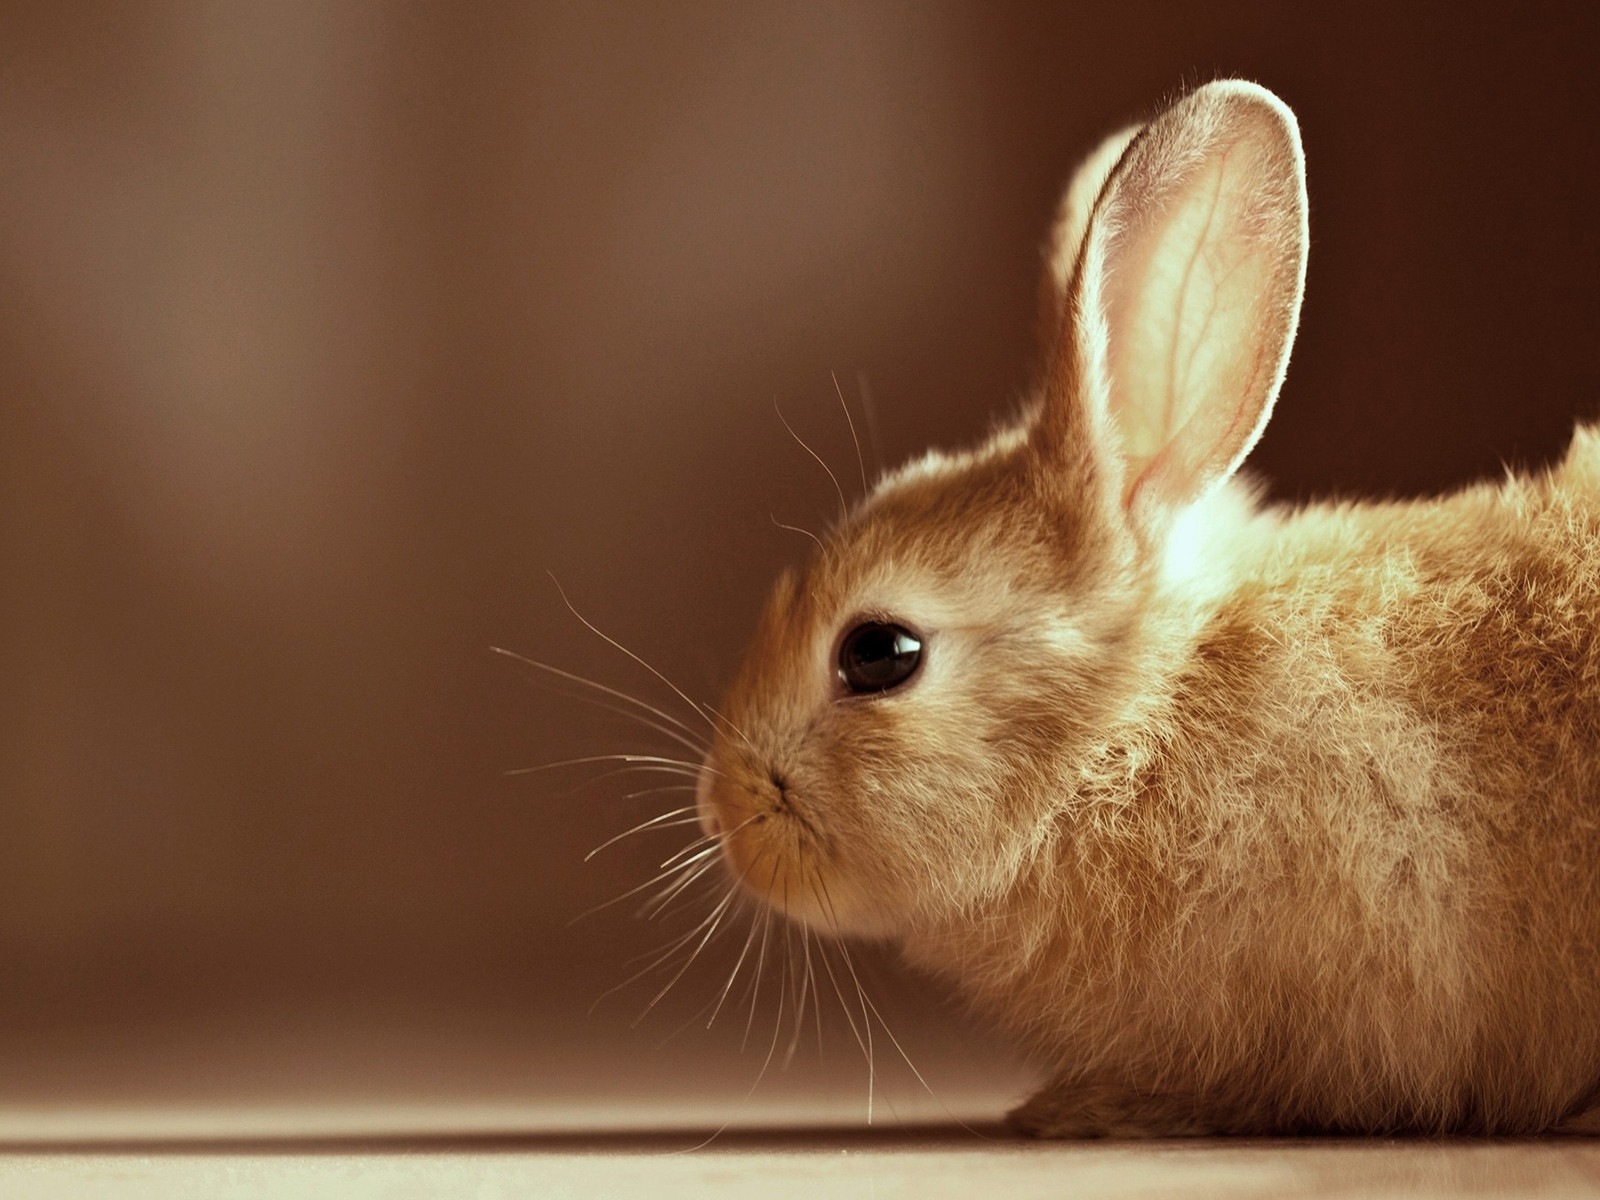 Furry animals, cute bunny HD wallpapers #19 - 1600x1200